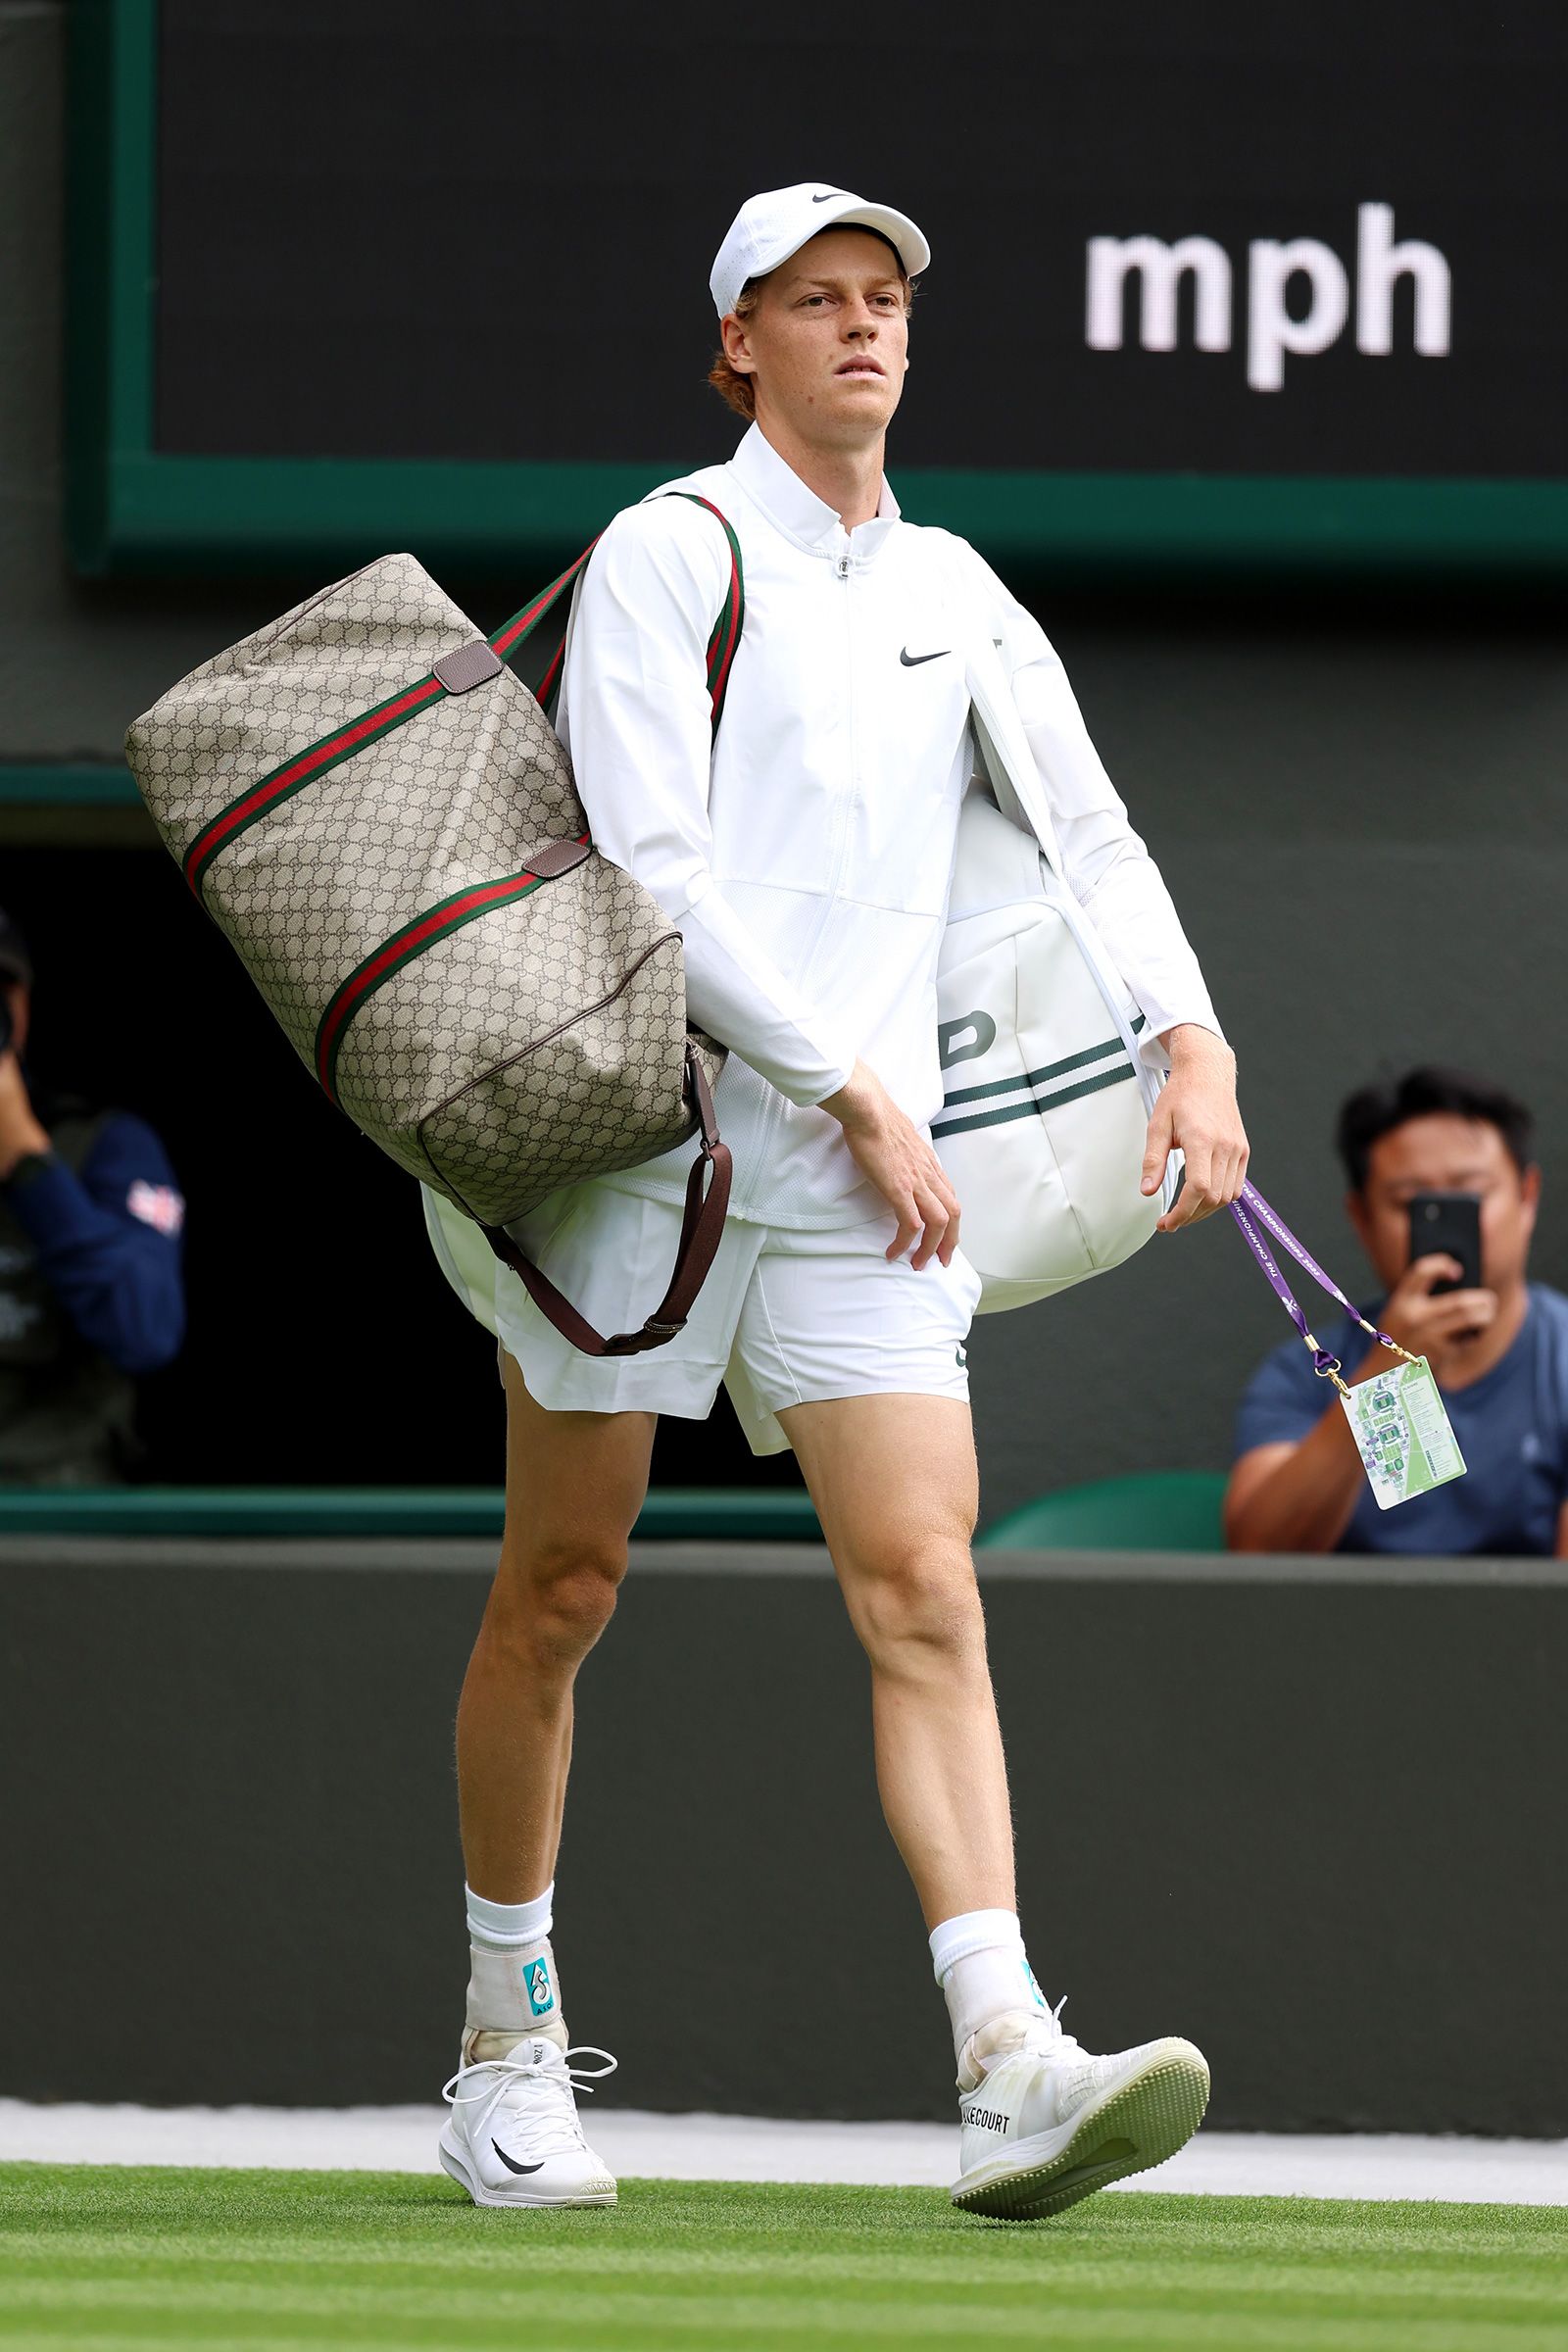 Jannik Sinner's making a Gucci show out of the US Open